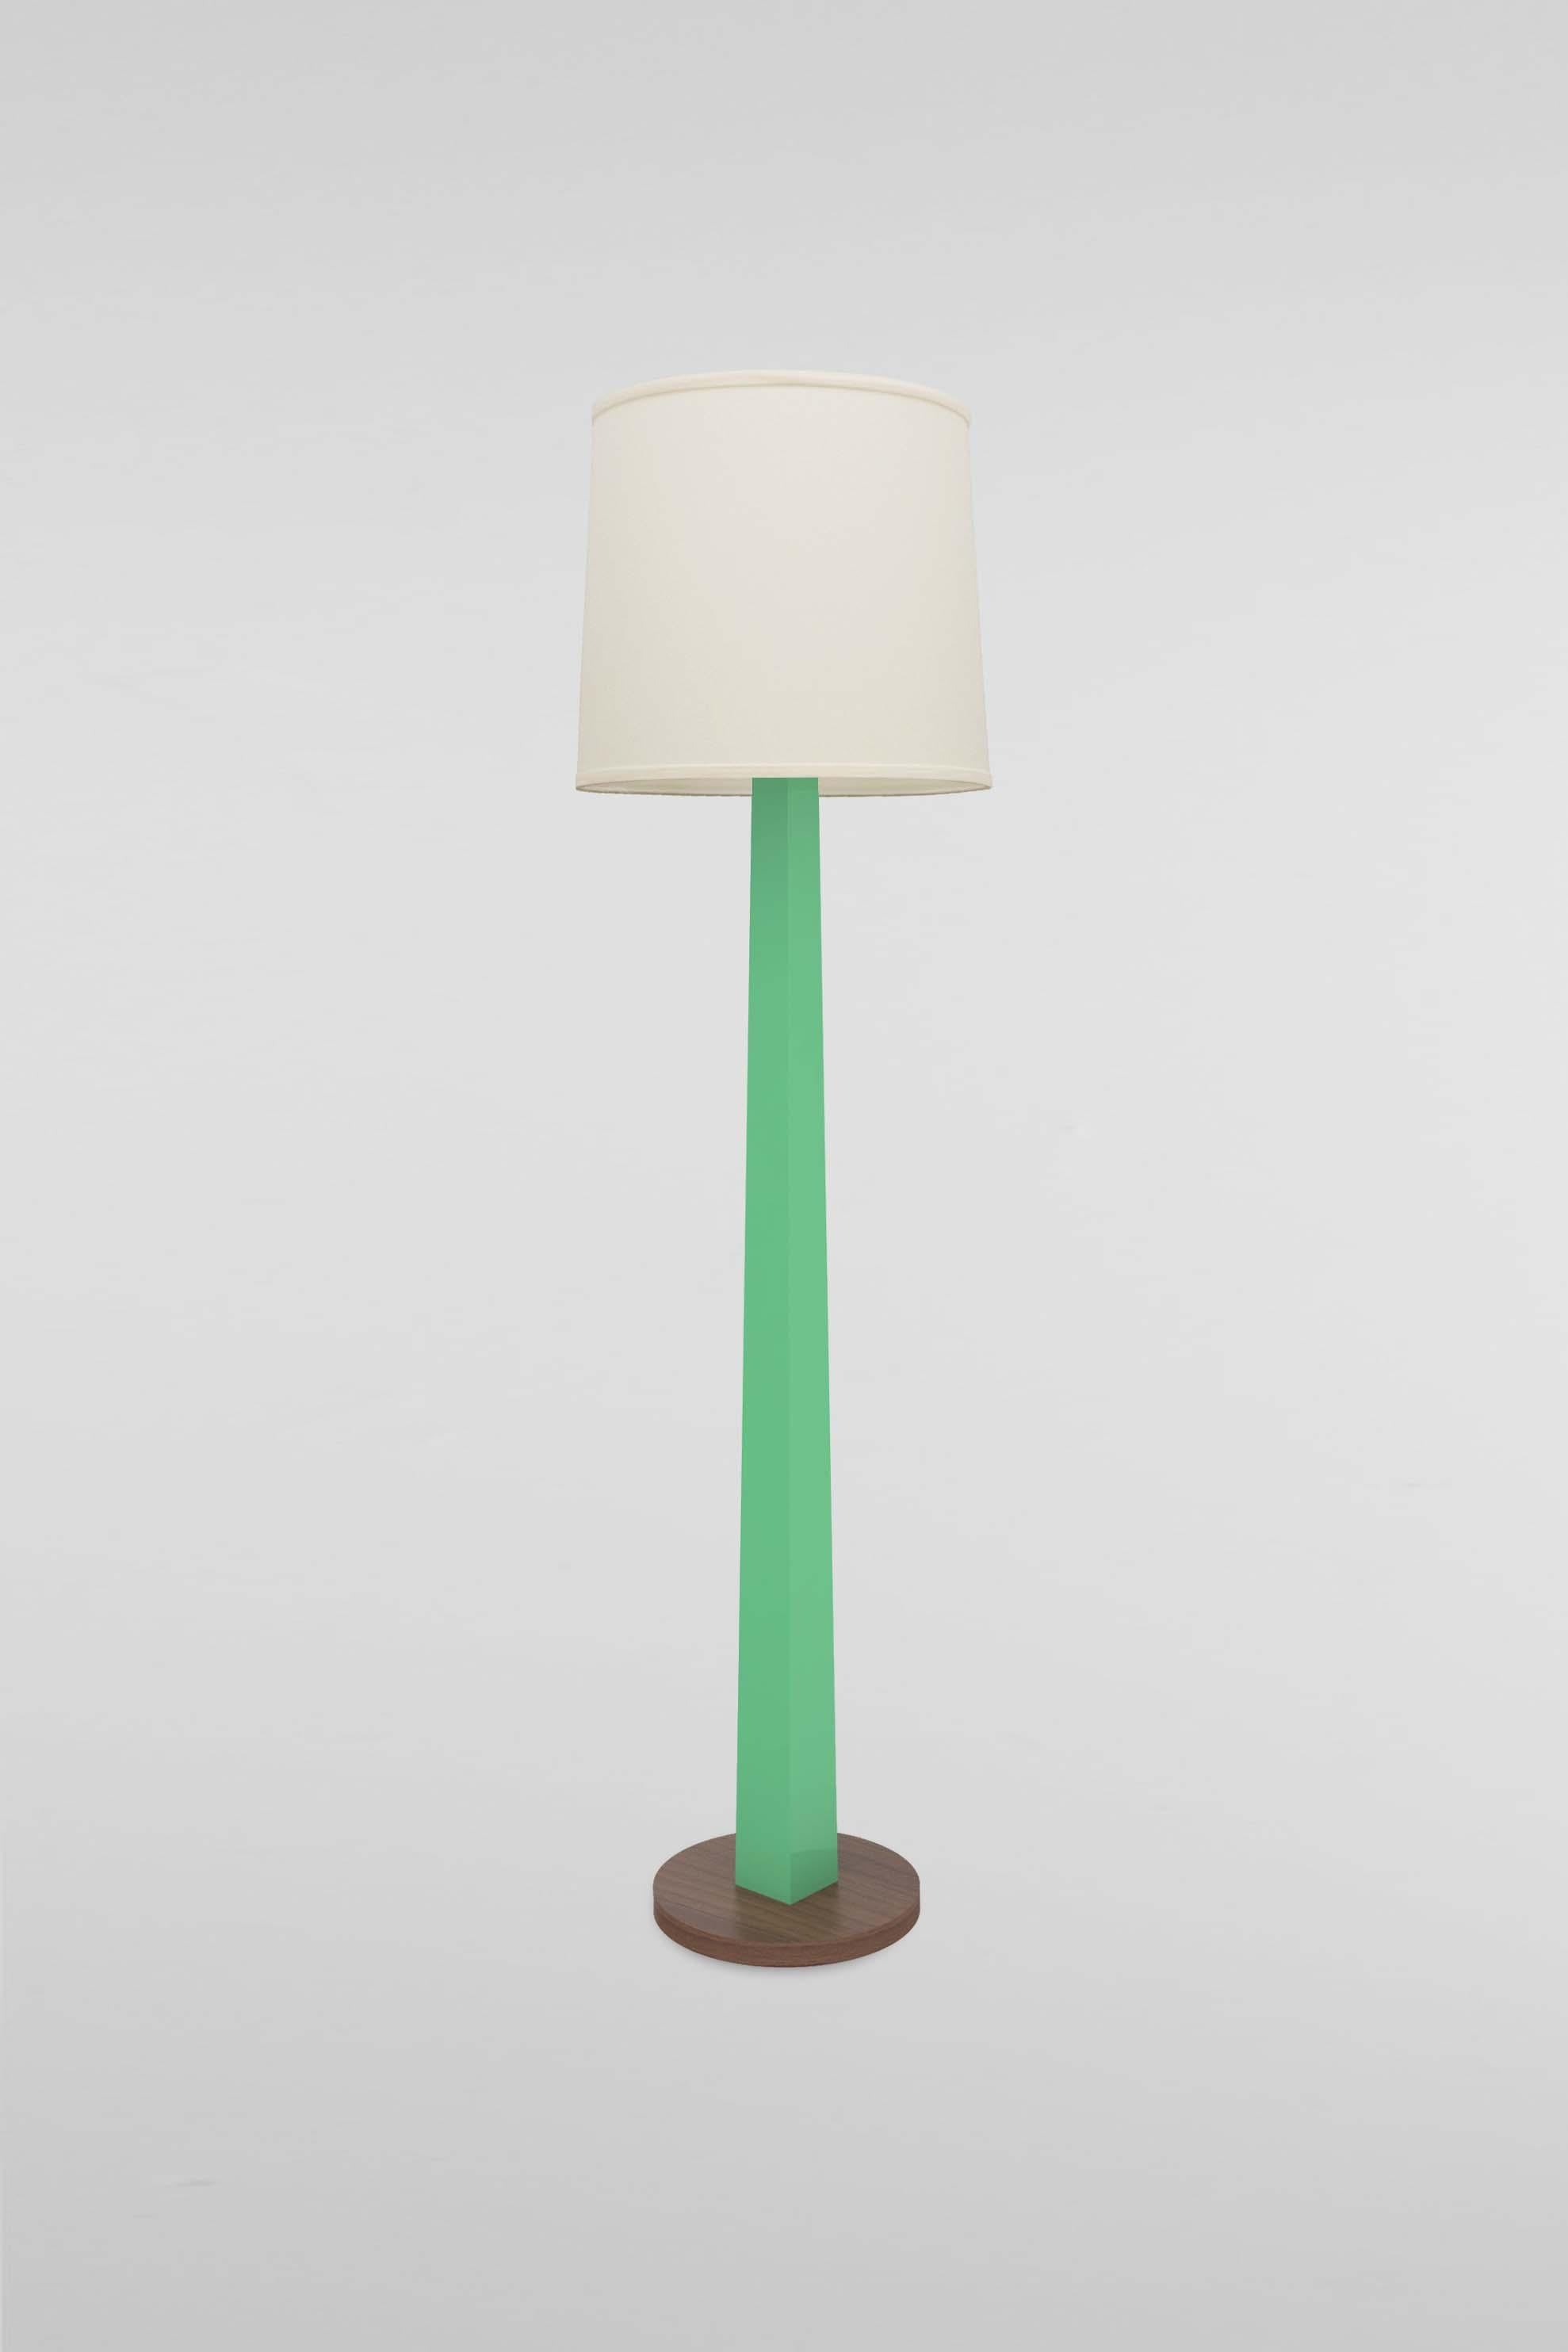 Minimalist Contemporary Forno Floor Lamp 002C in Walnut by Orphan Work For Sale